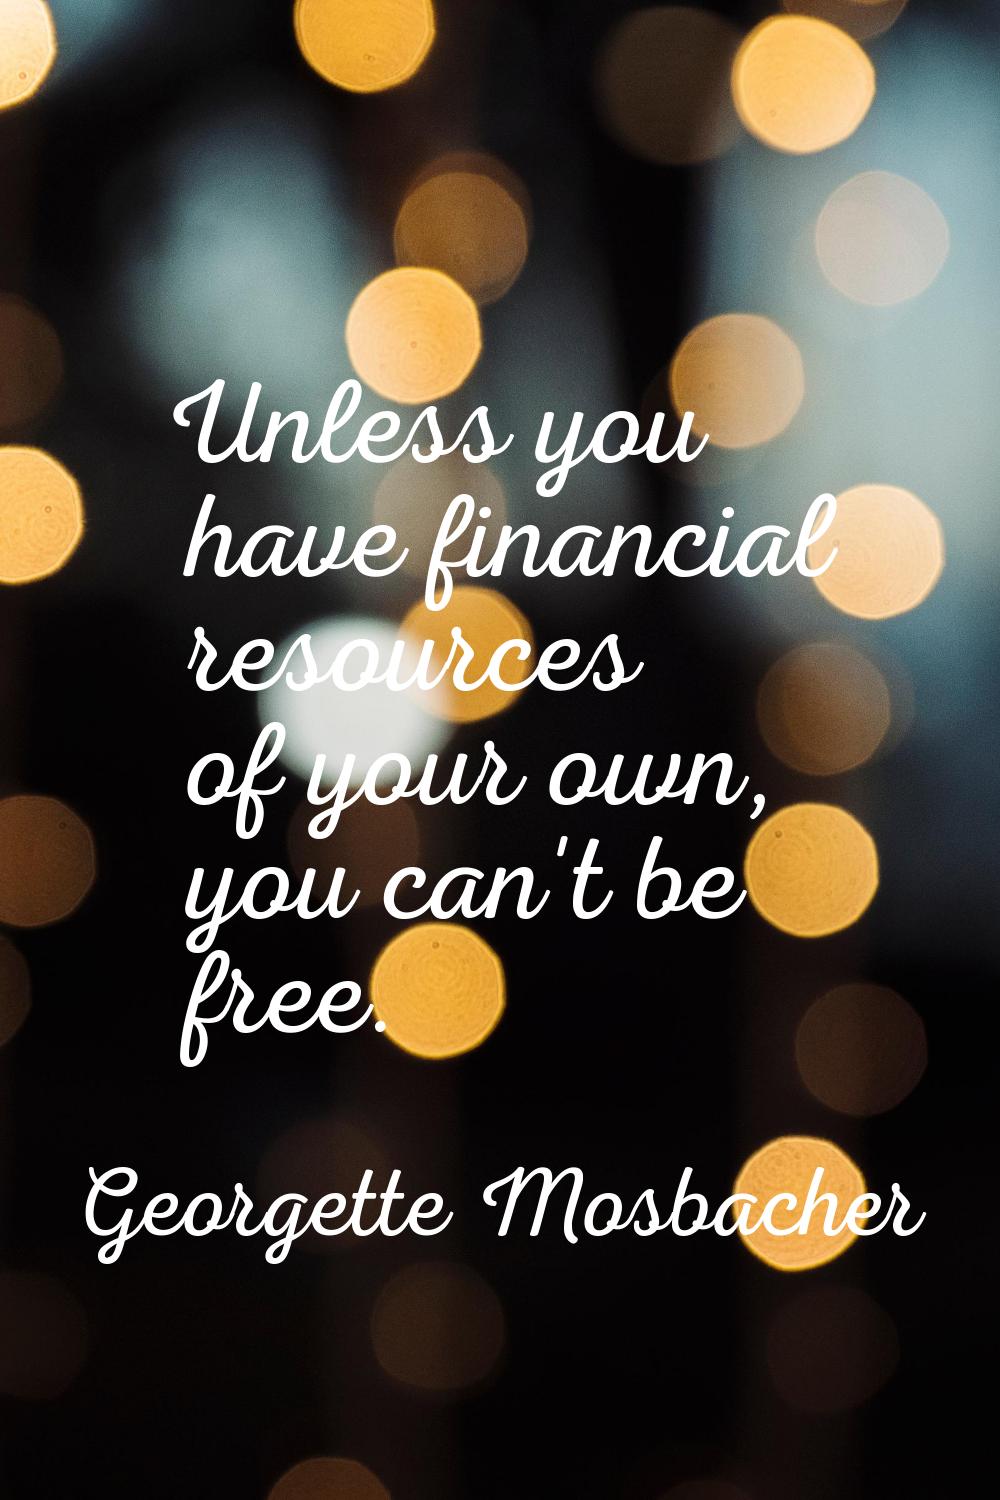 Unless you have financial resources of your own, you can't be free.